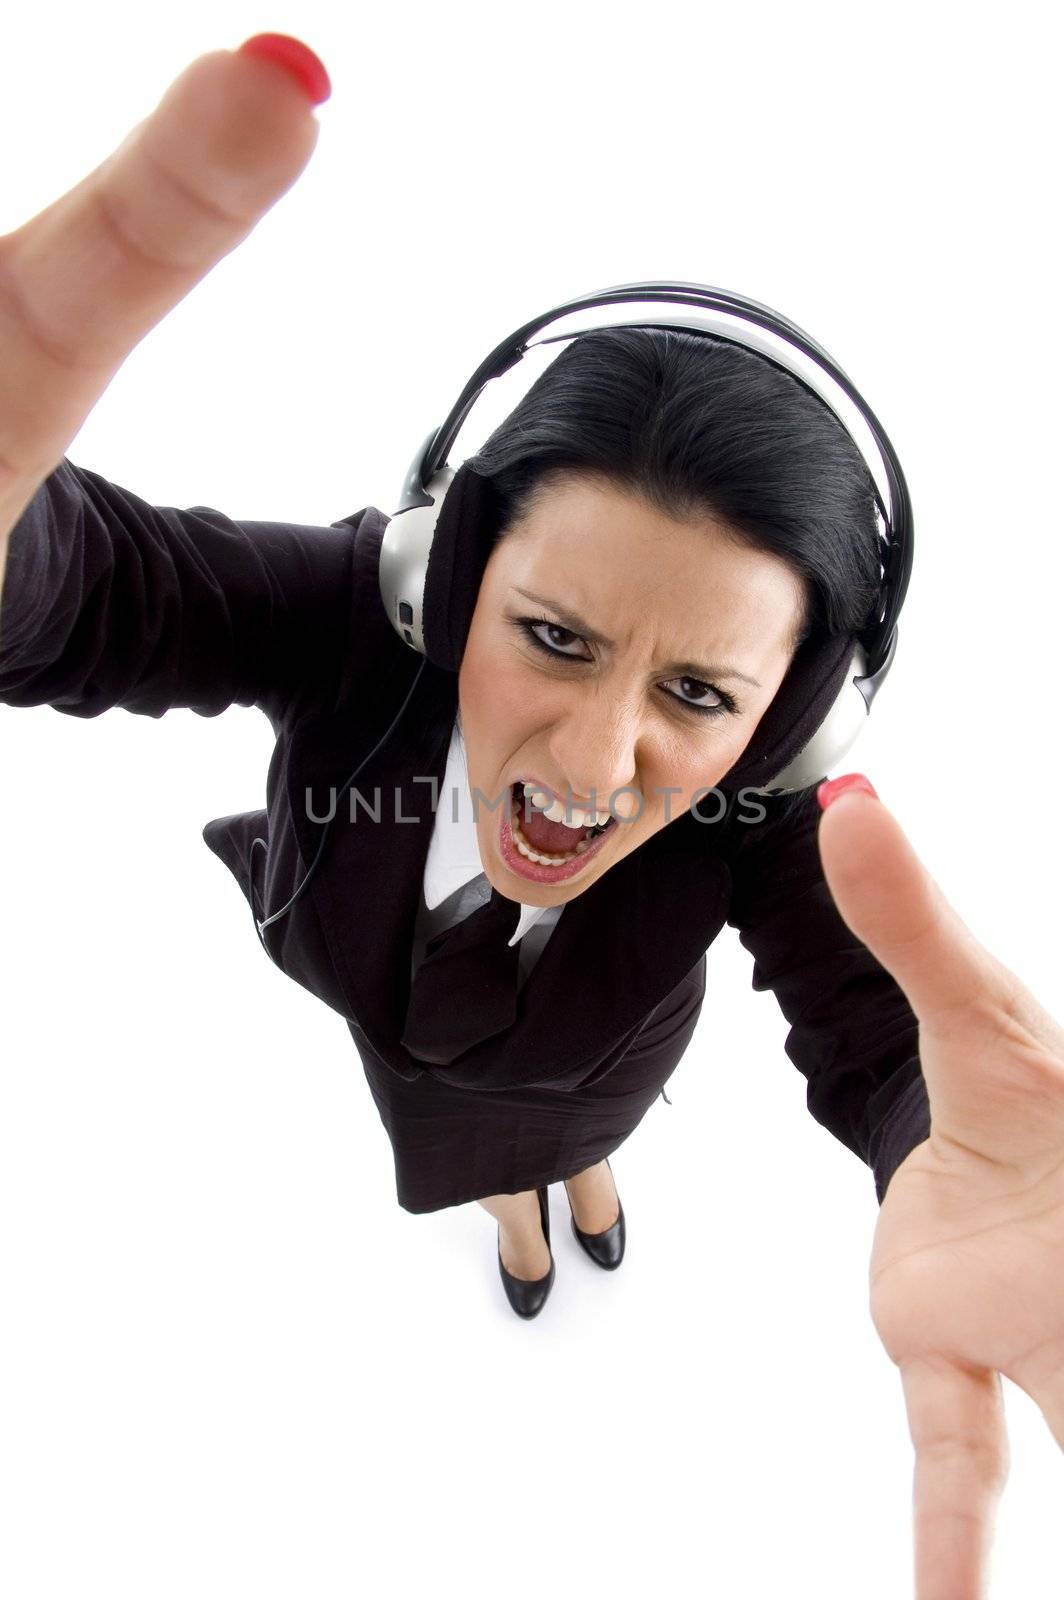 ceo wearing headphone against white background